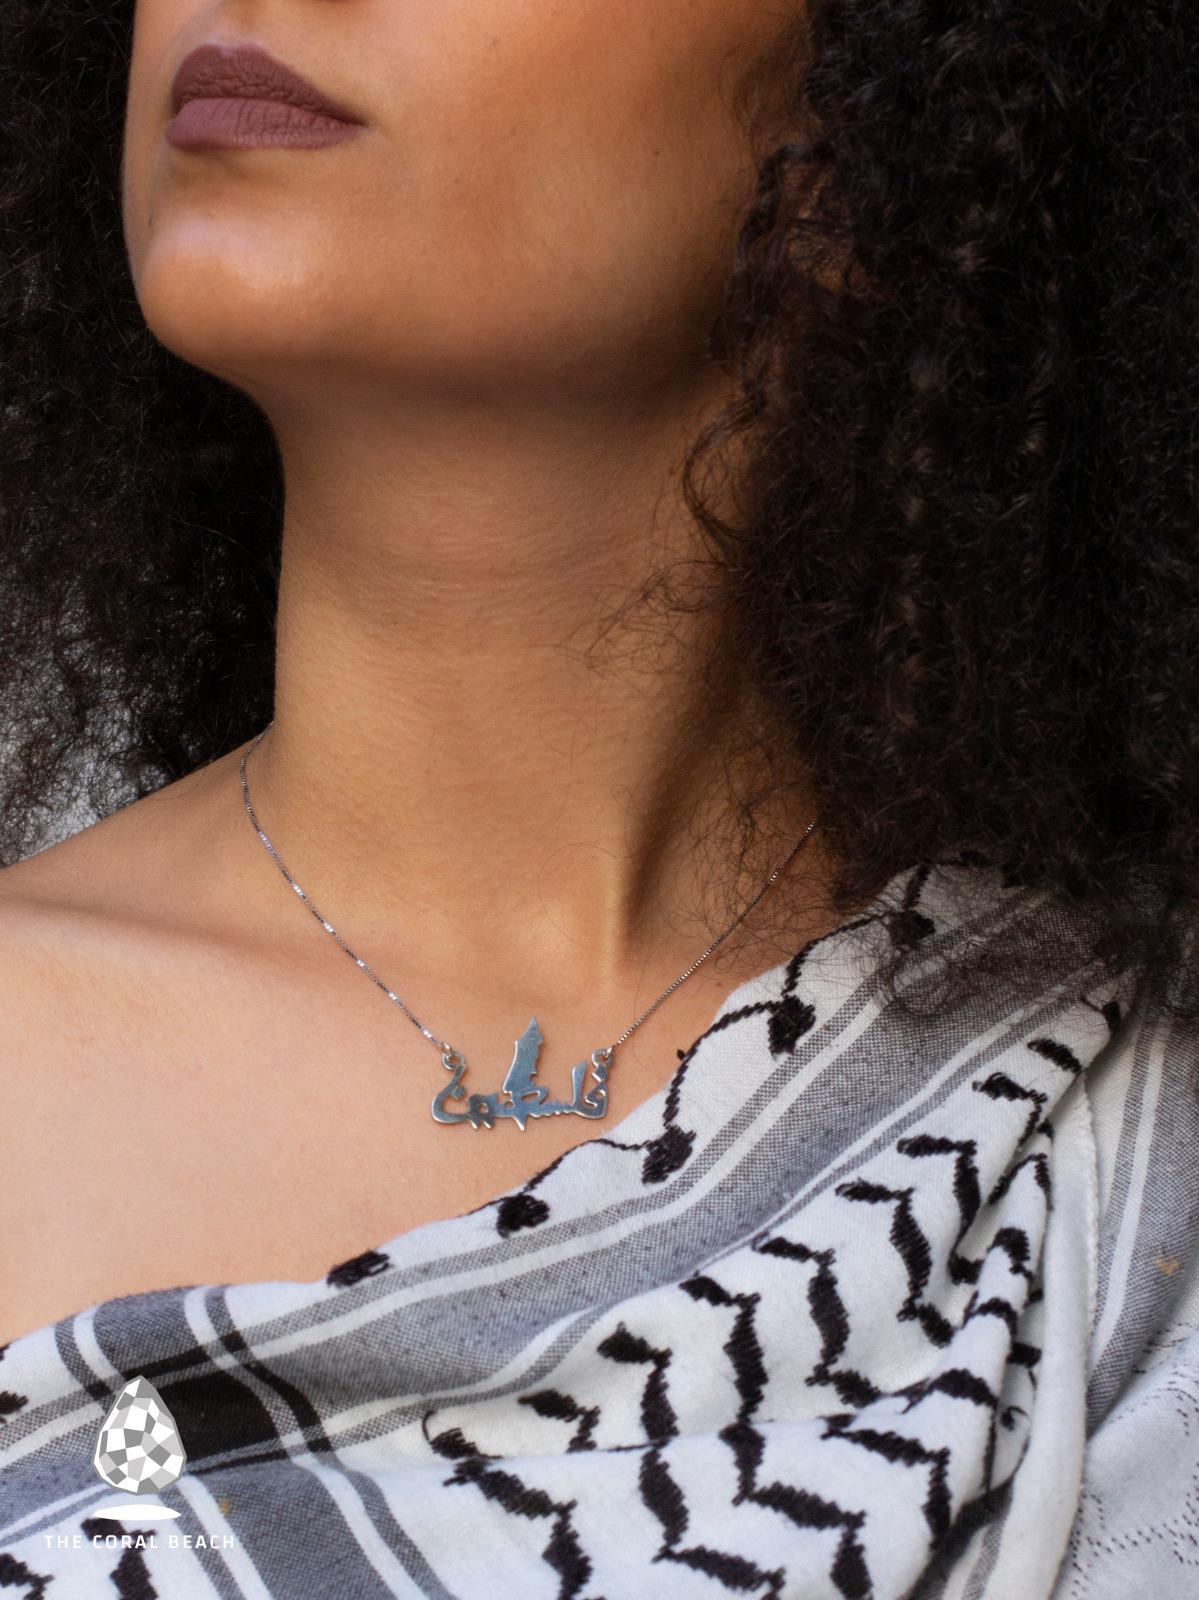 Palestine Arabic word with Palestine map necklace